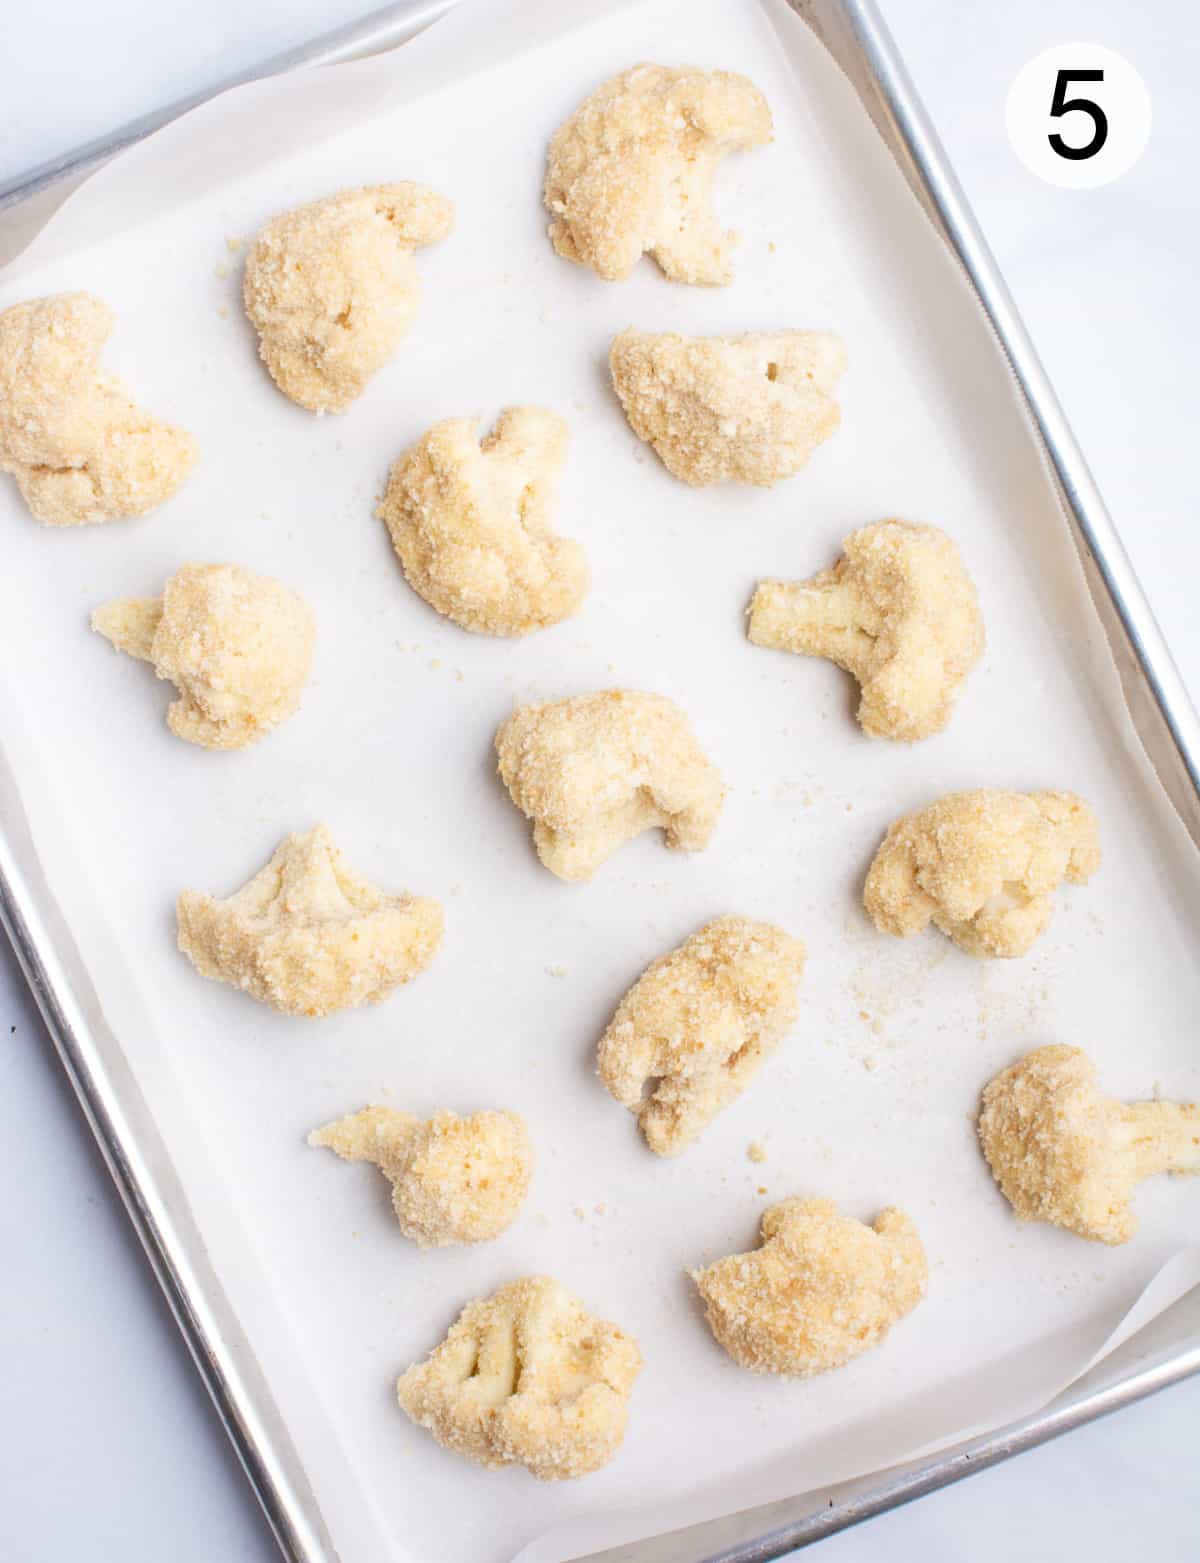 A pan of breaded cauliflower before baking.